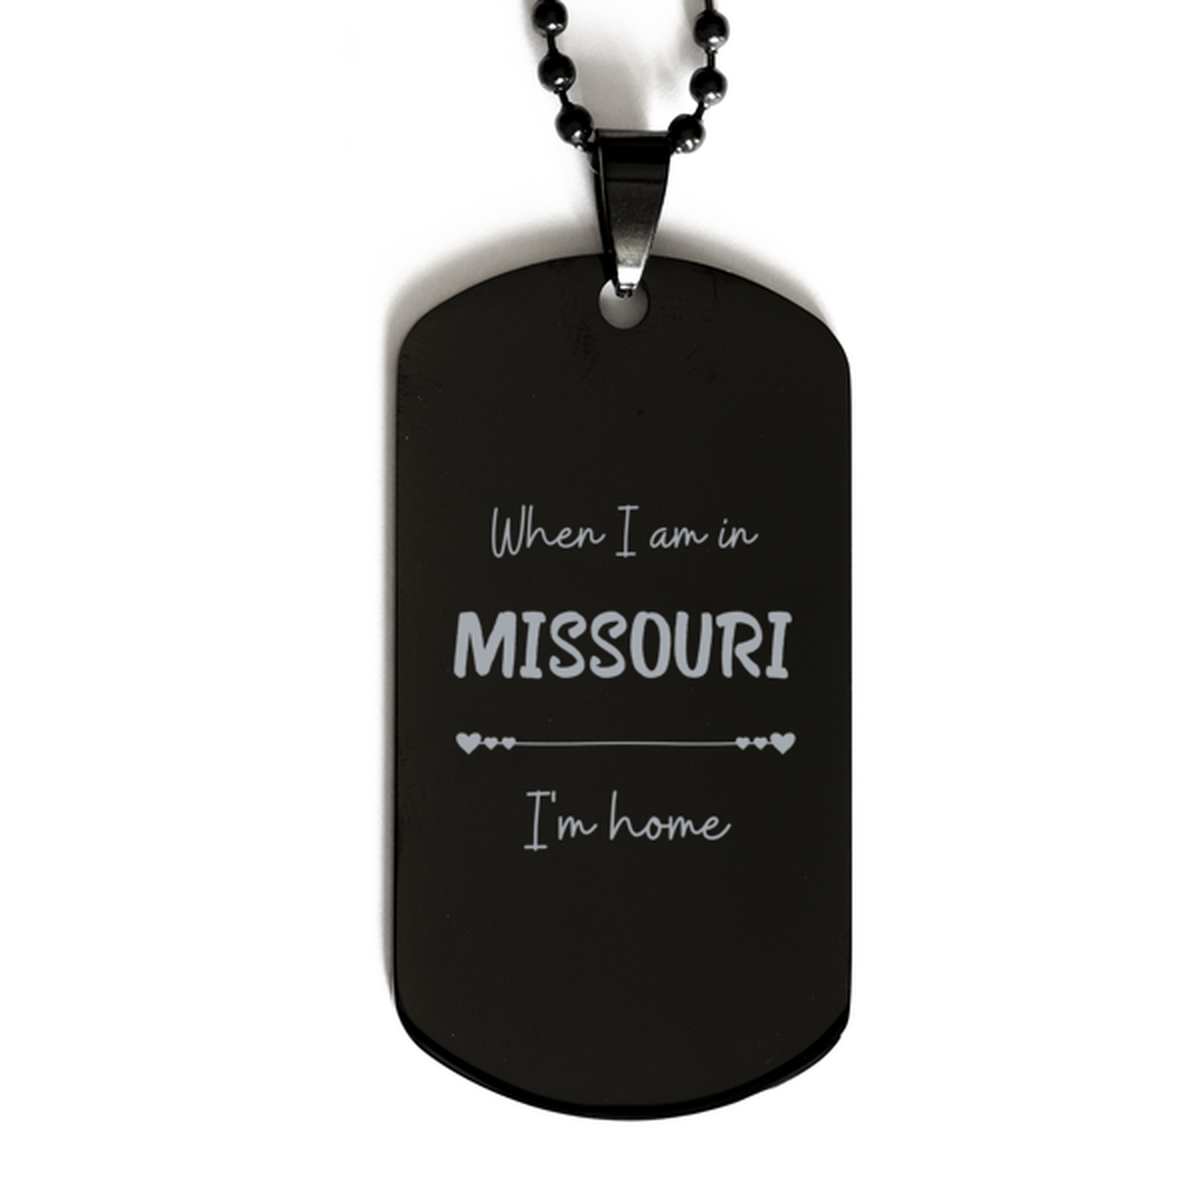 When I am in Missouri I'm home Black Dog Tag, Cheap Gifts For Missouri, State Missouri Birthday Gifts for Friends Coworker